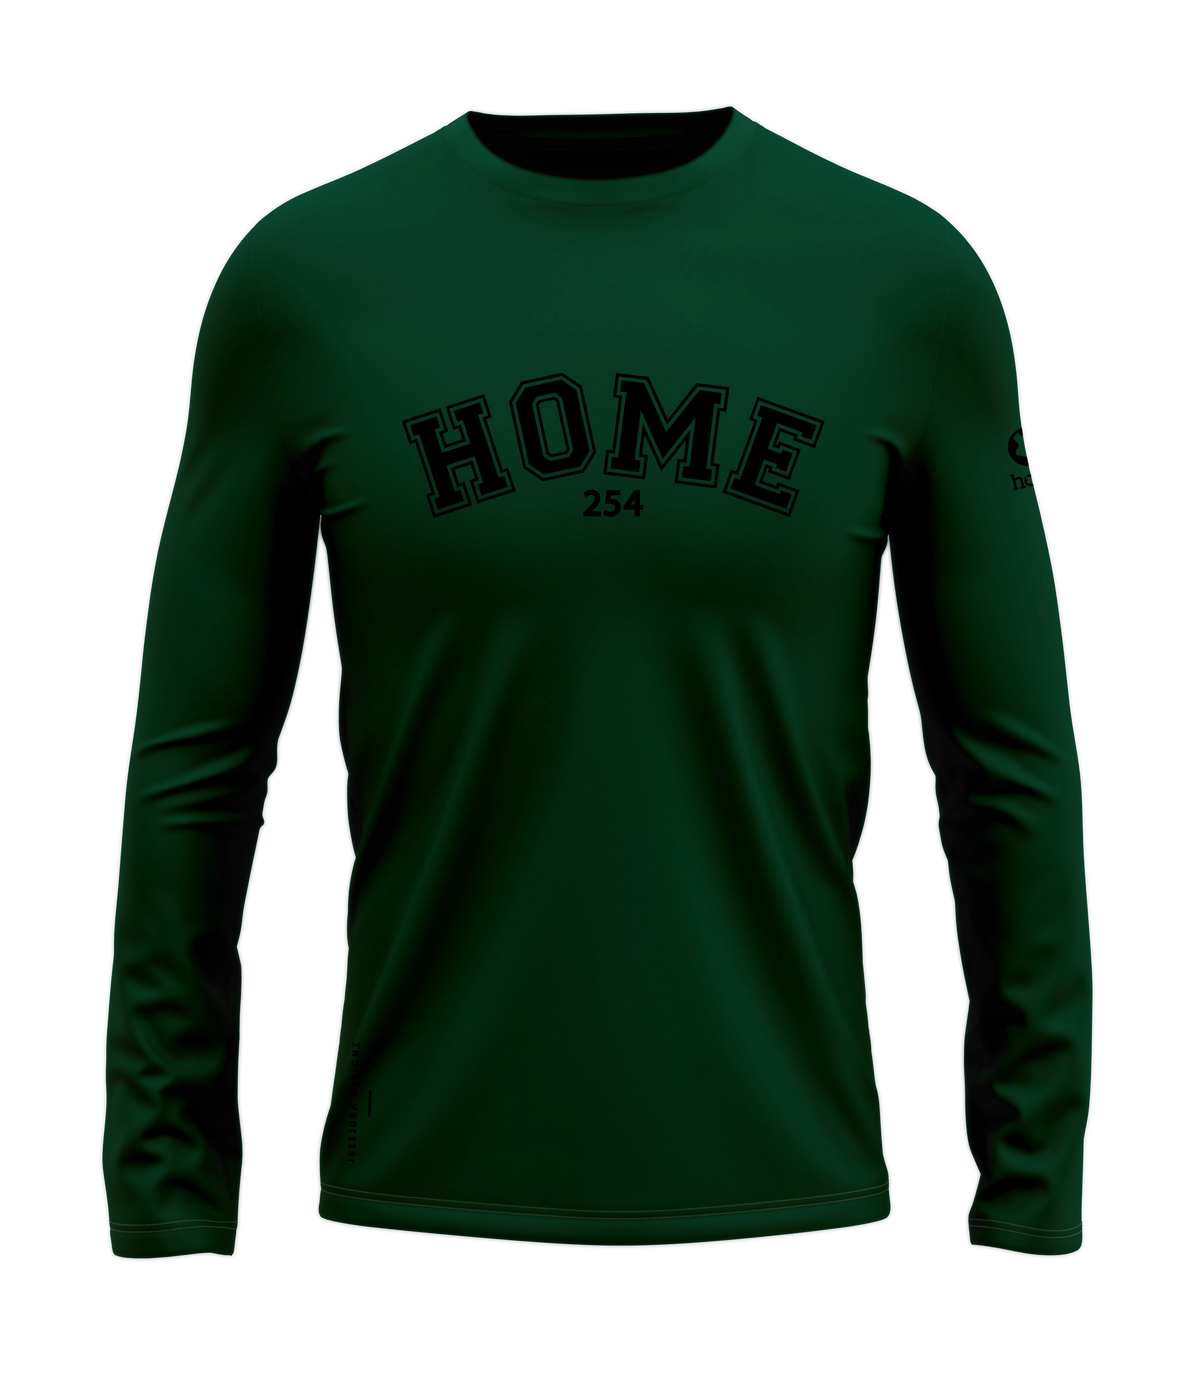 home_254 LONG-SLEEVED RICH GREEN T-SHIRT WITH A BLACK COLLEGE PRINT – COTTON PLUS FABRIC